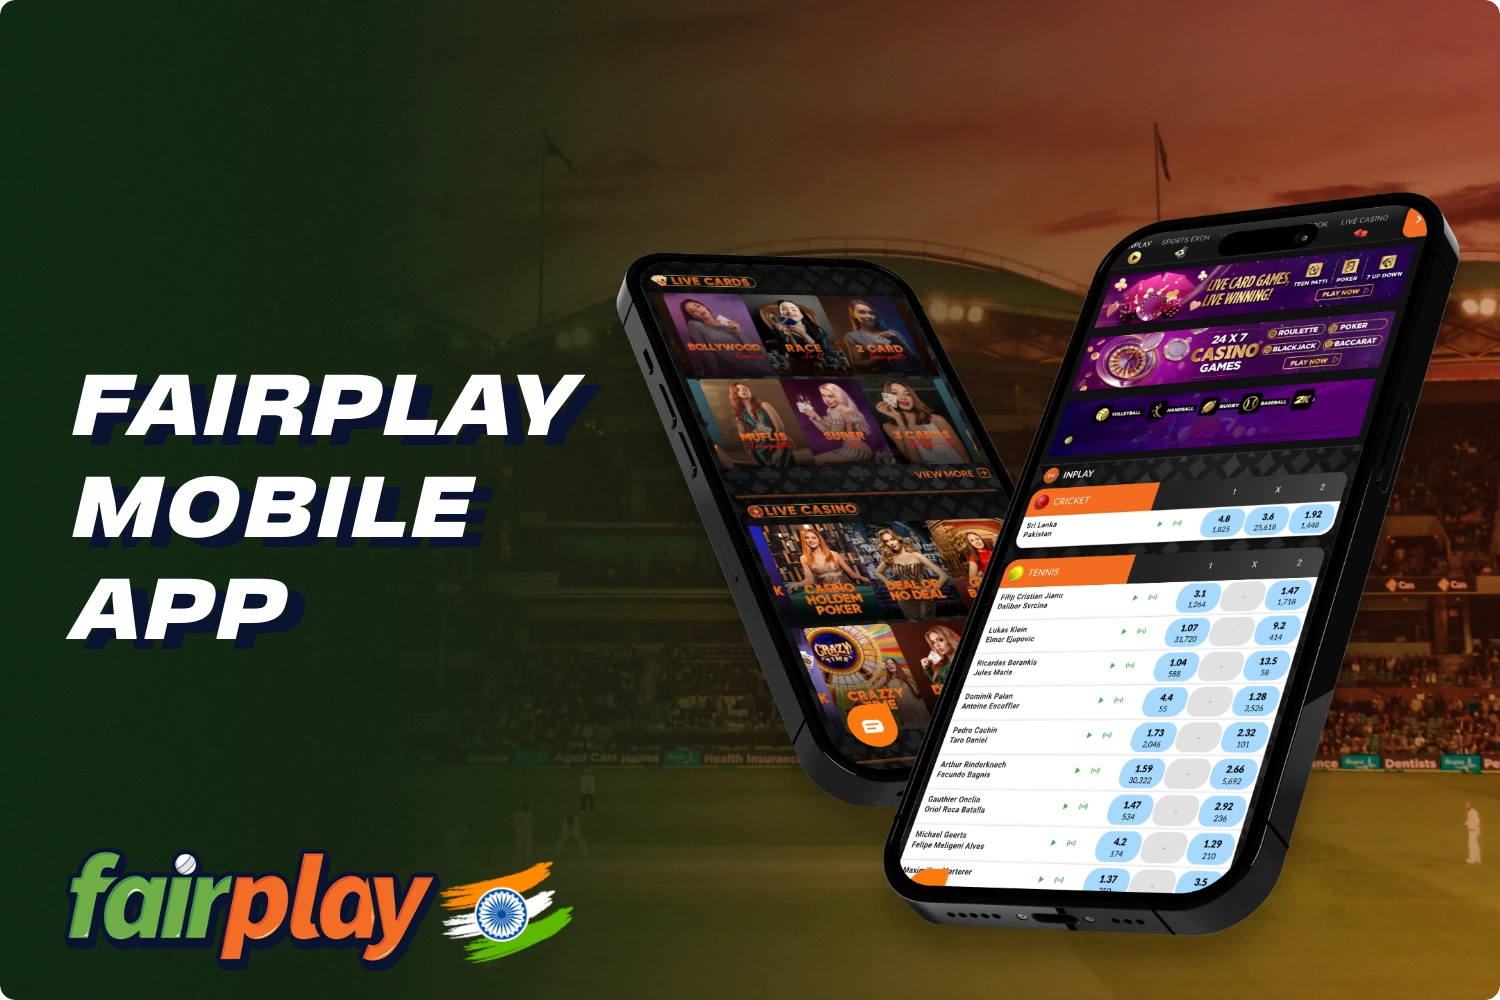 Download the Fairplay mobile app for Android and iOS completely free of charge from the official website